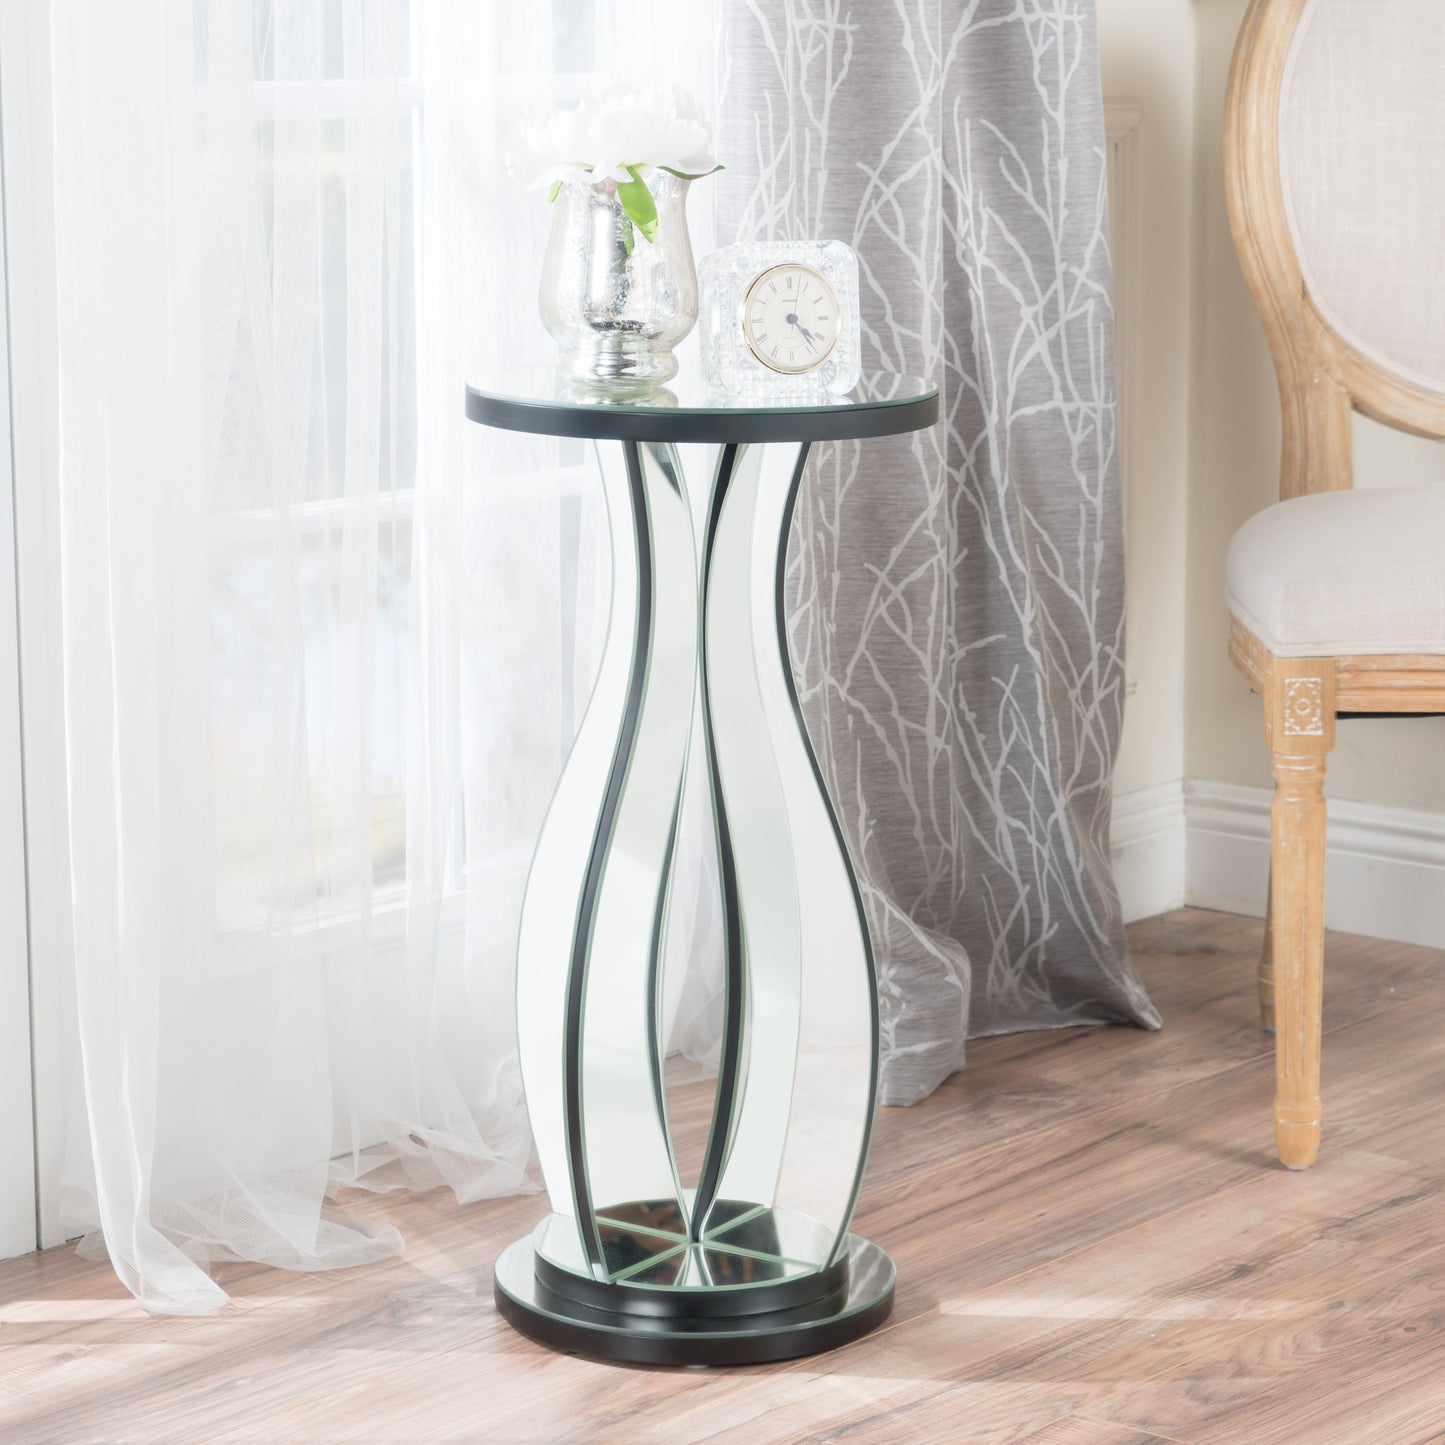 Tyne Modern Glam Curvy Mirror Accent Table with Circular Tabletop